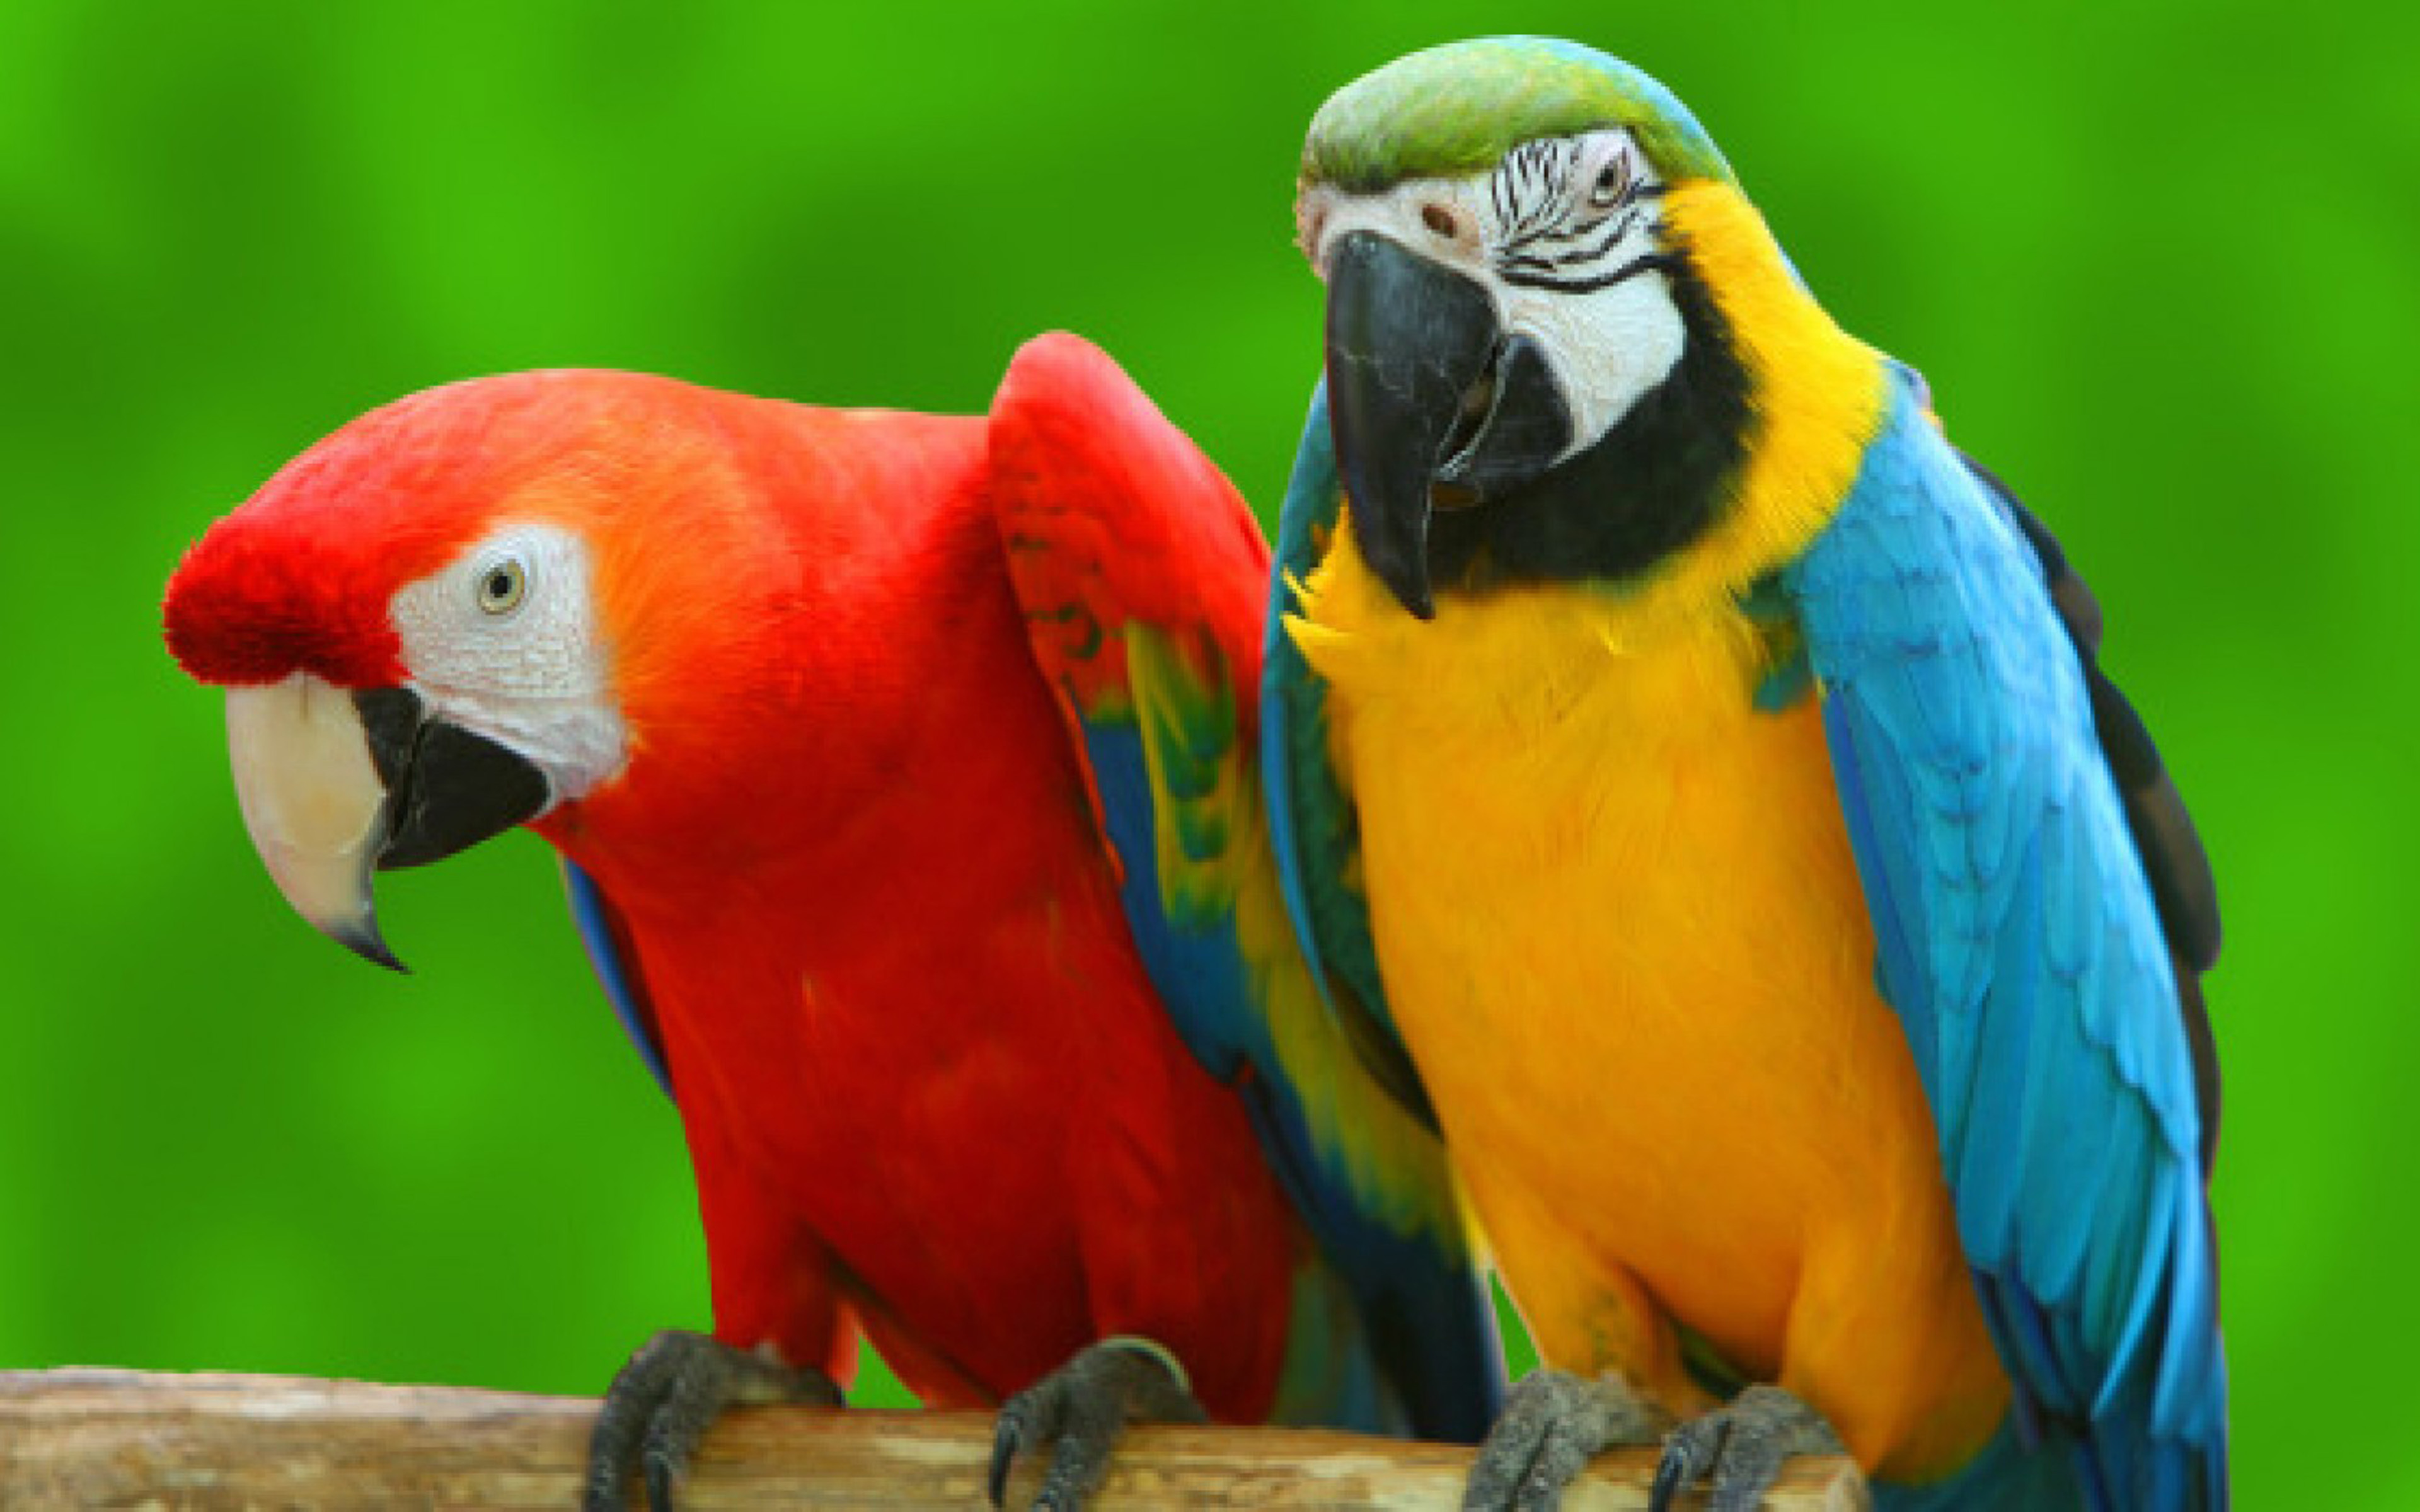 Yelow And Red Parrots Branches Birds Hd Wallpapers : Wallpapers13.com